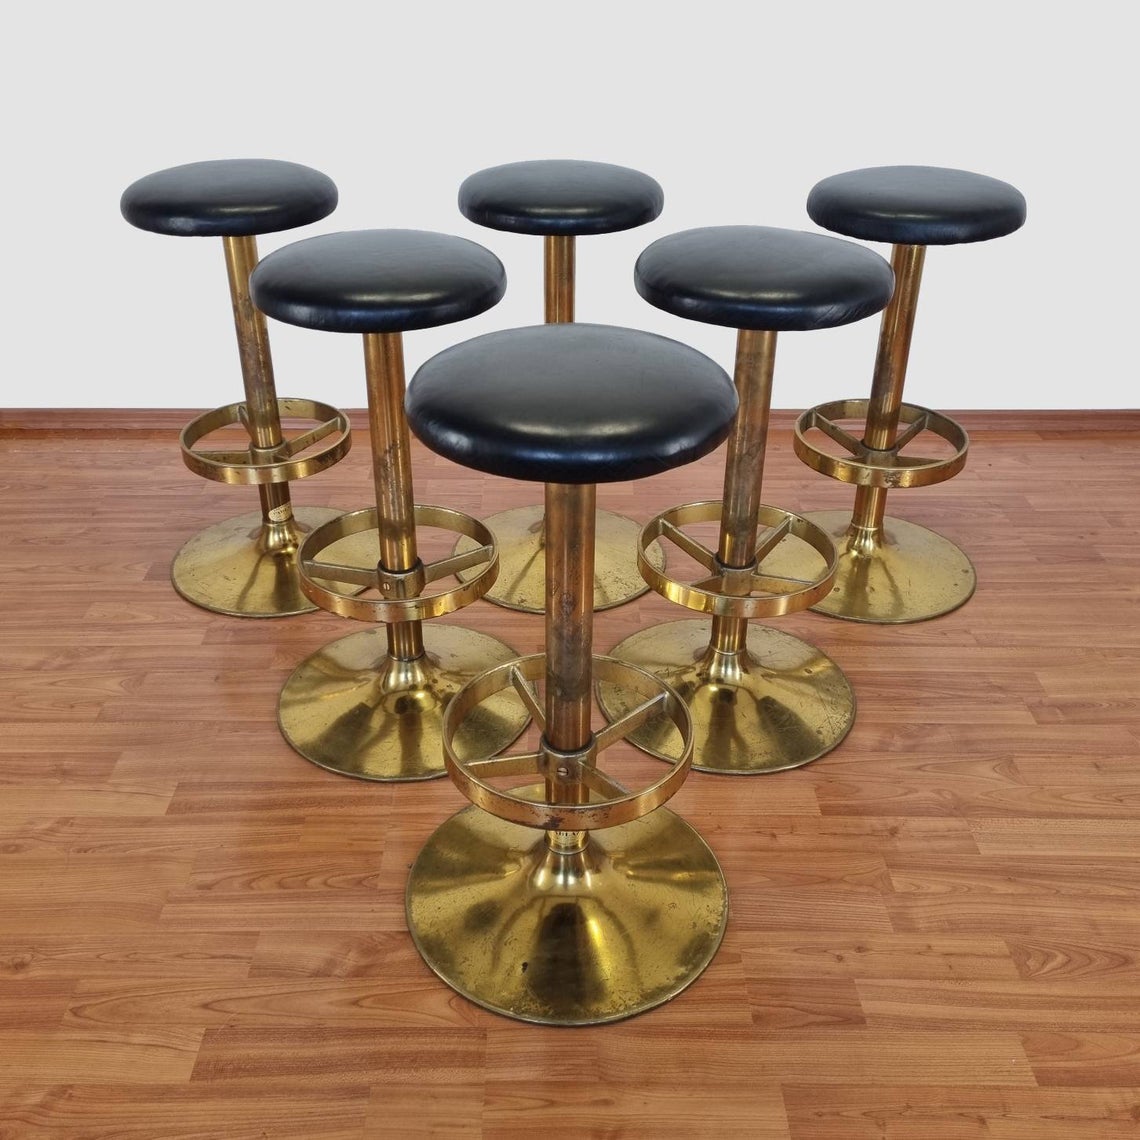 1 of 6 Vintage Metal And Leather Bar Stools, Yugoslavia 80s